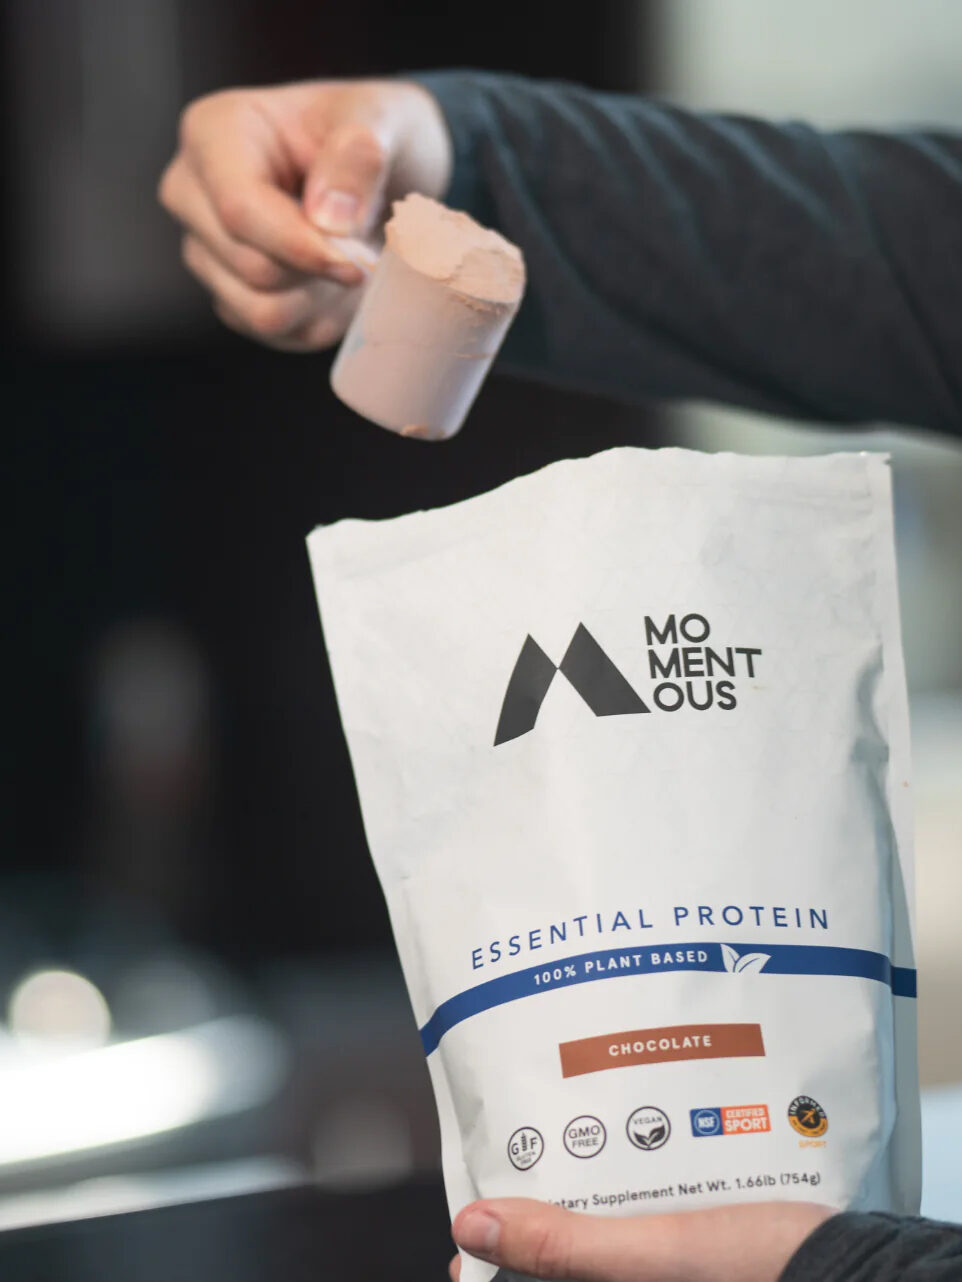 A hand scoops protein powder from a bag.